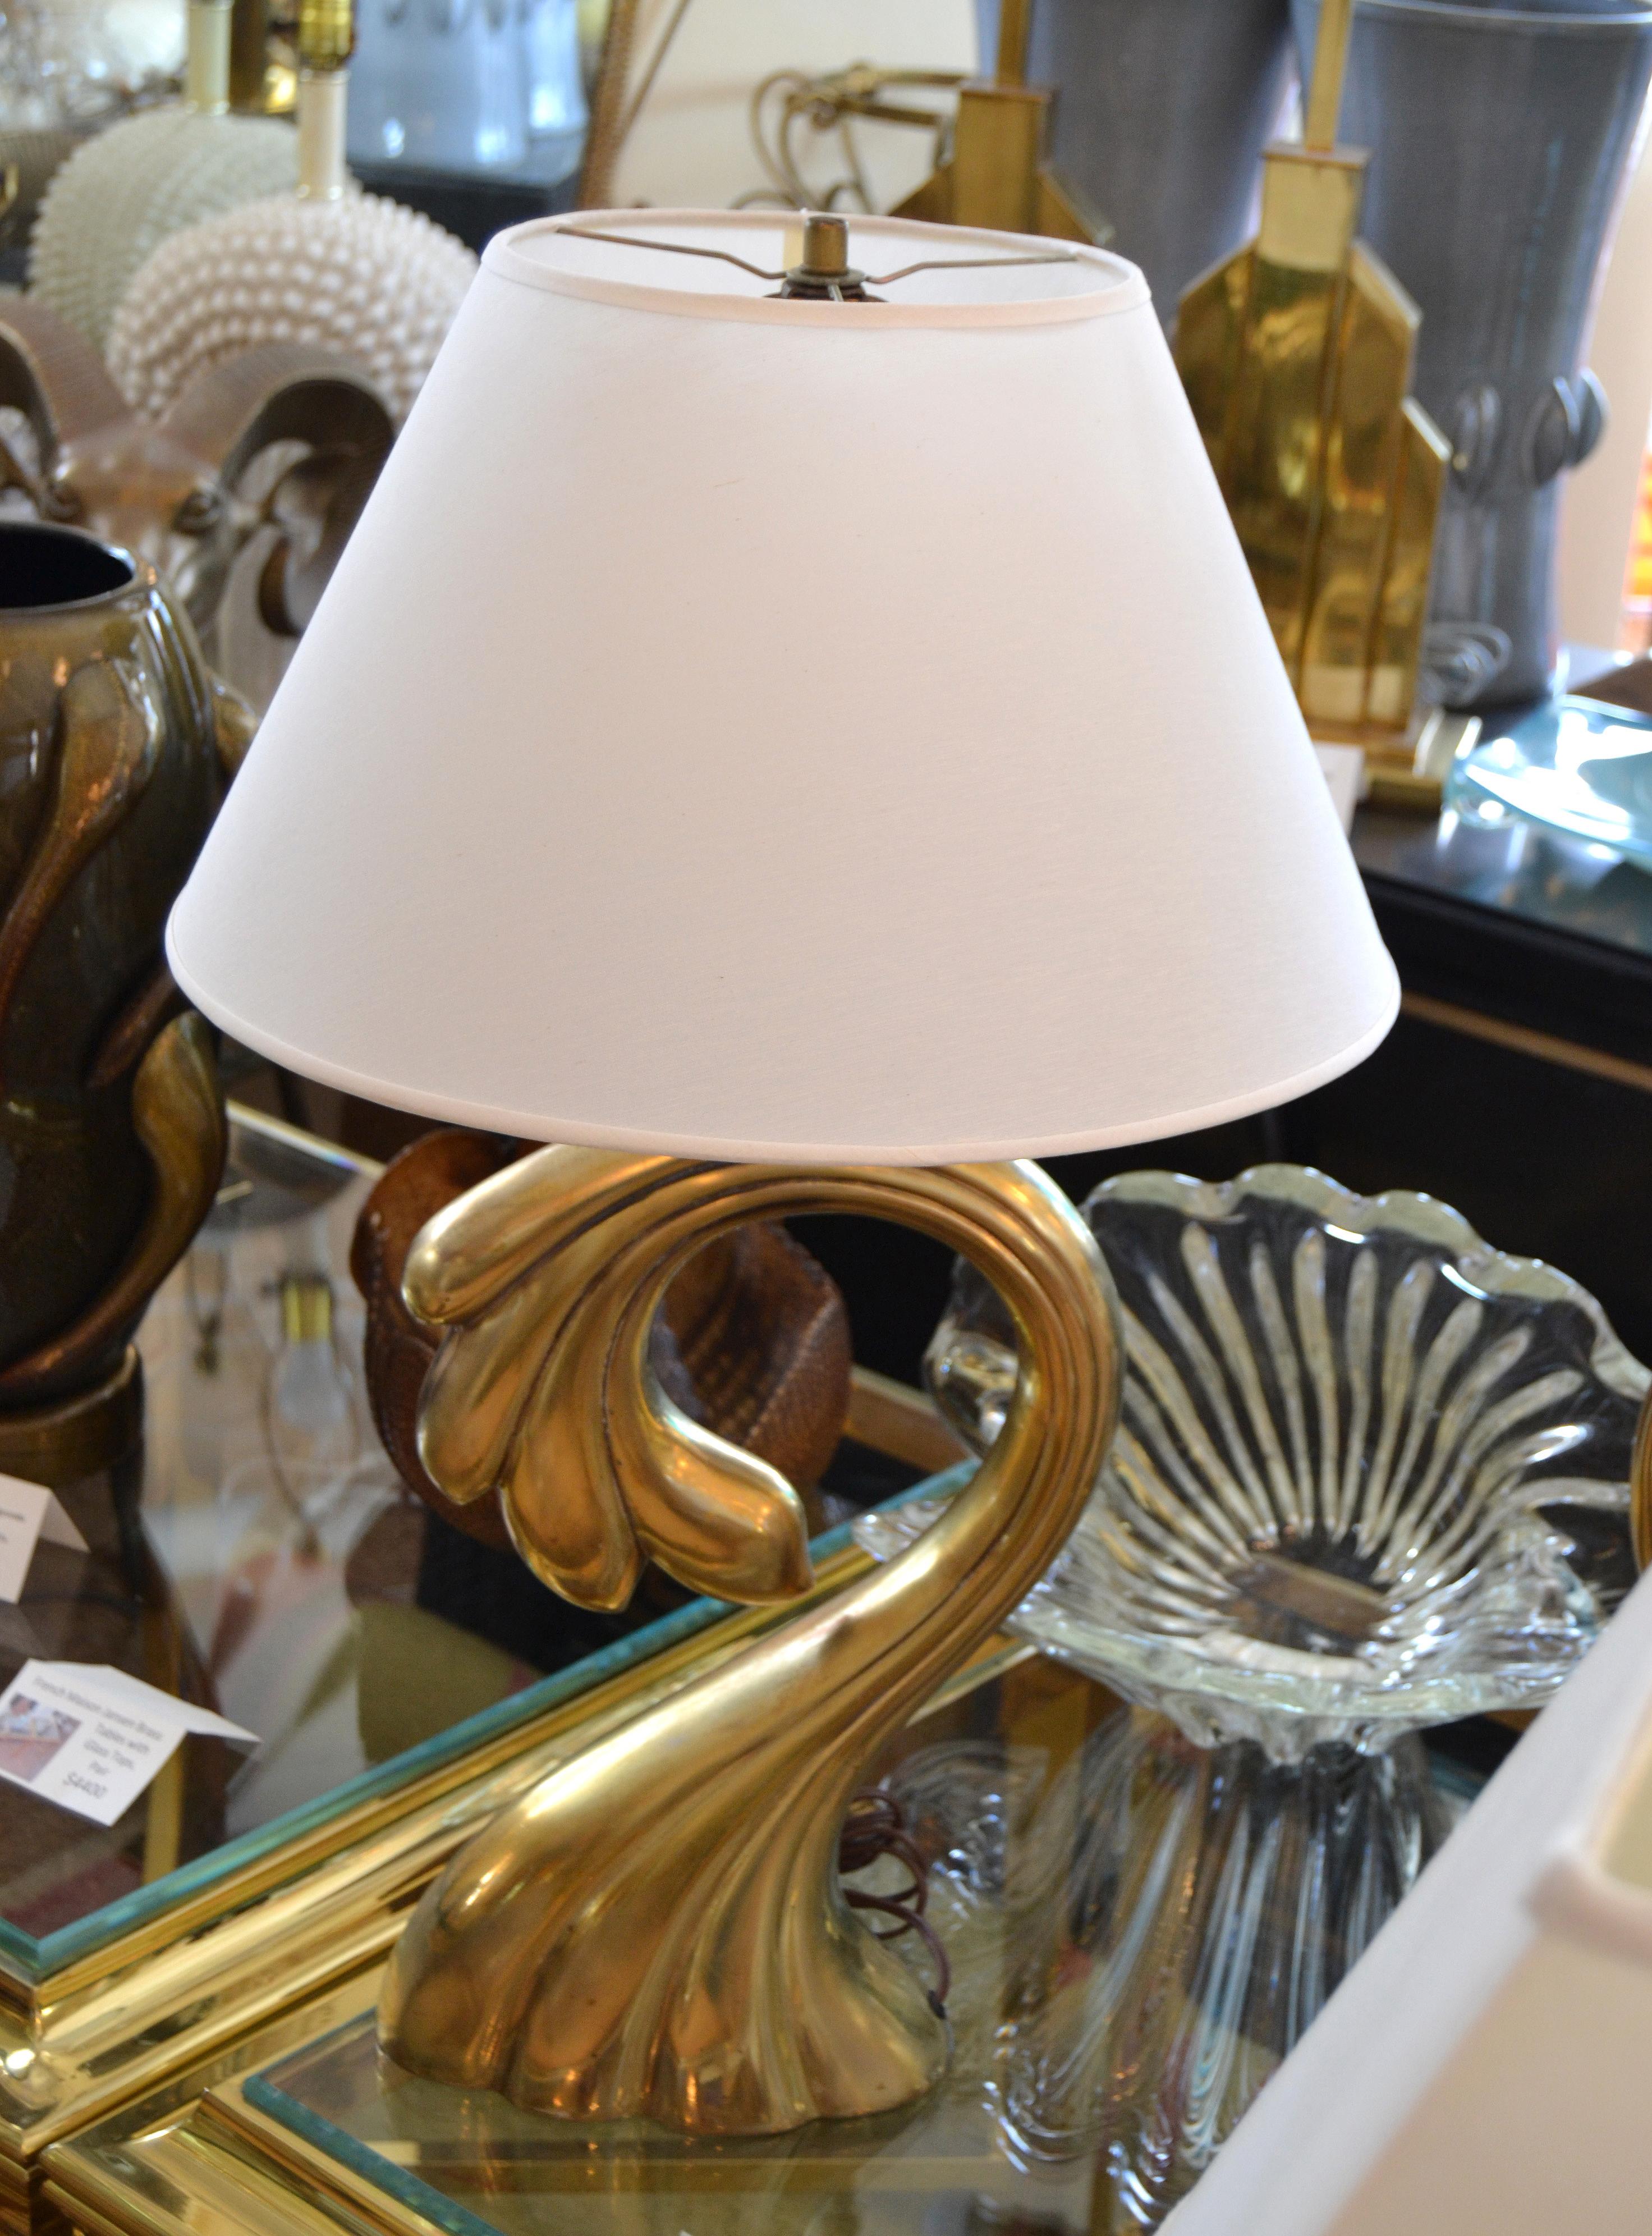 We offer a Mid-Century Modern sculptural brass table lamp from the 1970s in the manner of Pierre Cardin manufactured by Heyco.
In perfect working condition and uses a max. 75 watts light bulb.
Note: We have no shade, harp or finial with it.
 